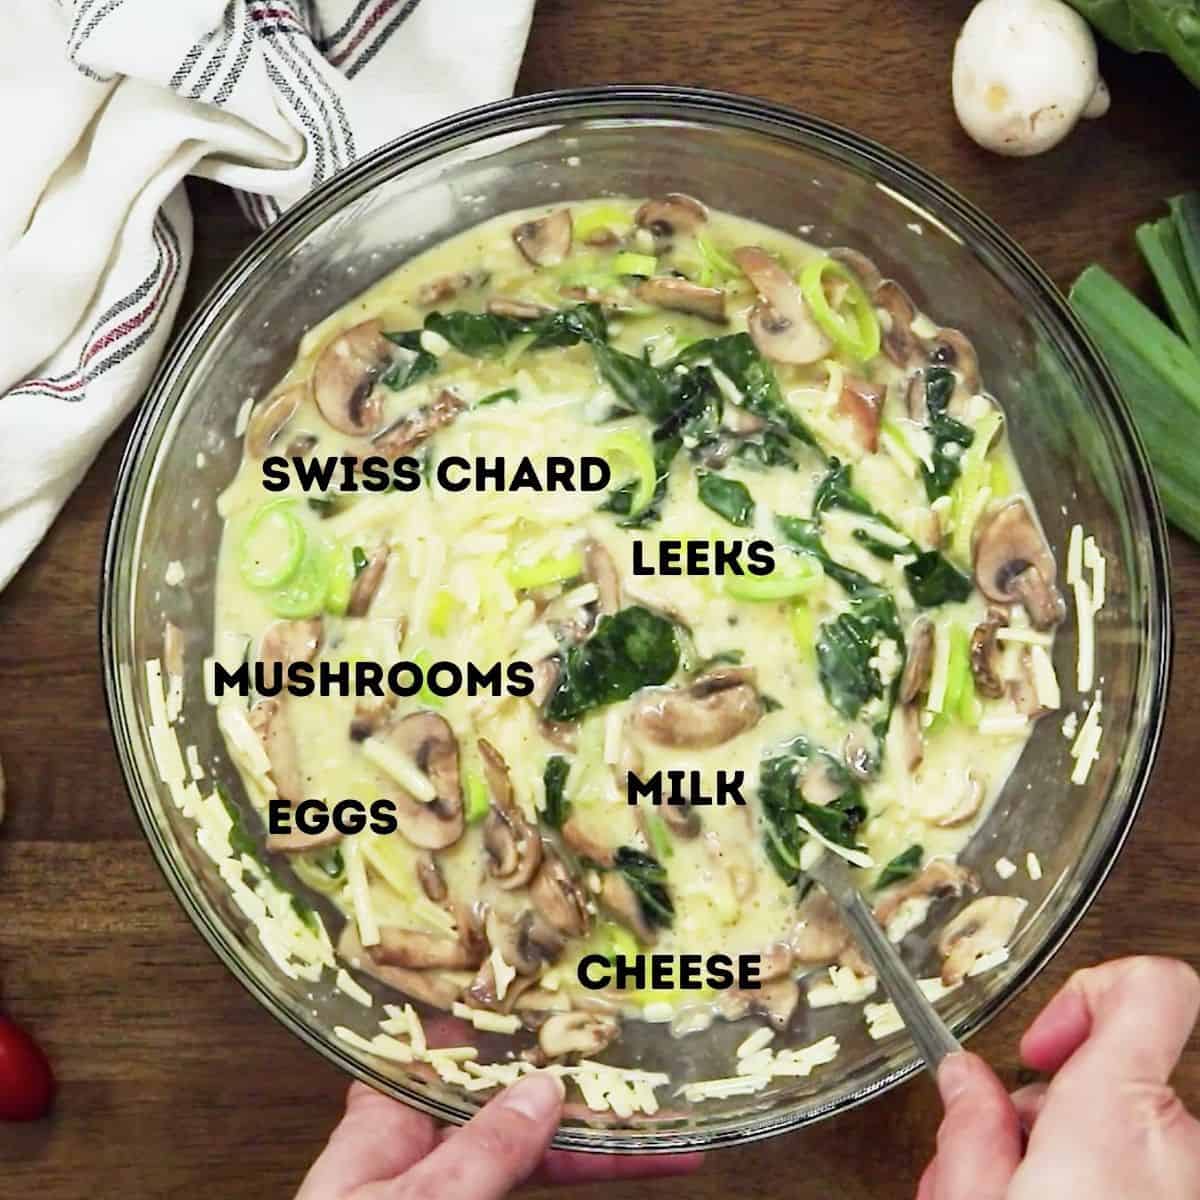 A mixing bowl of ingredients for a veggie quiche.